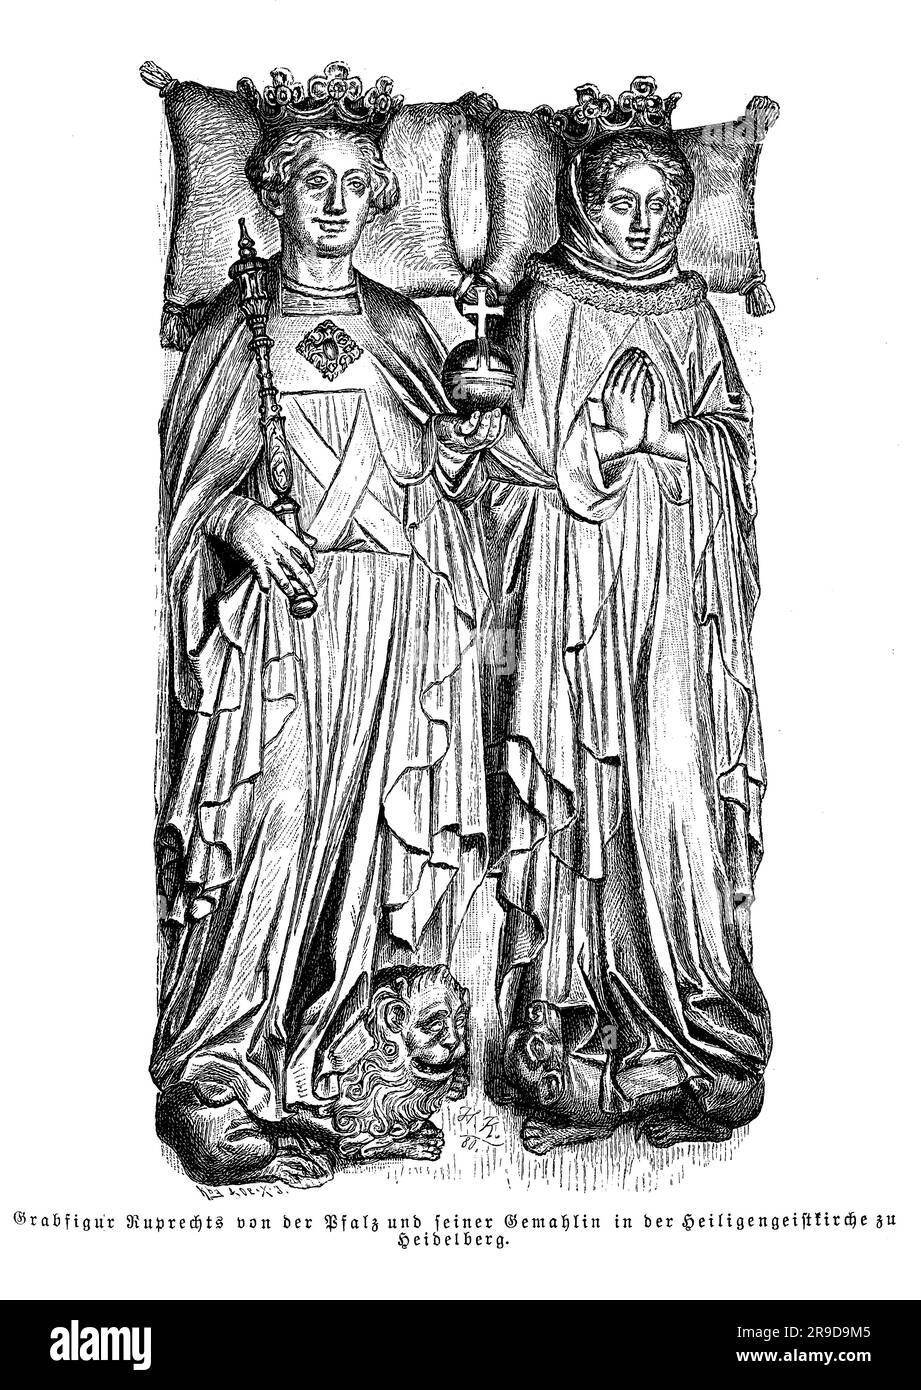 Tombstone of Rupert King of the Romans and his wife Elisabeth of Hohenzollern in Church of the Holy Spirit, Heidelberg, 15th century Stock Photo